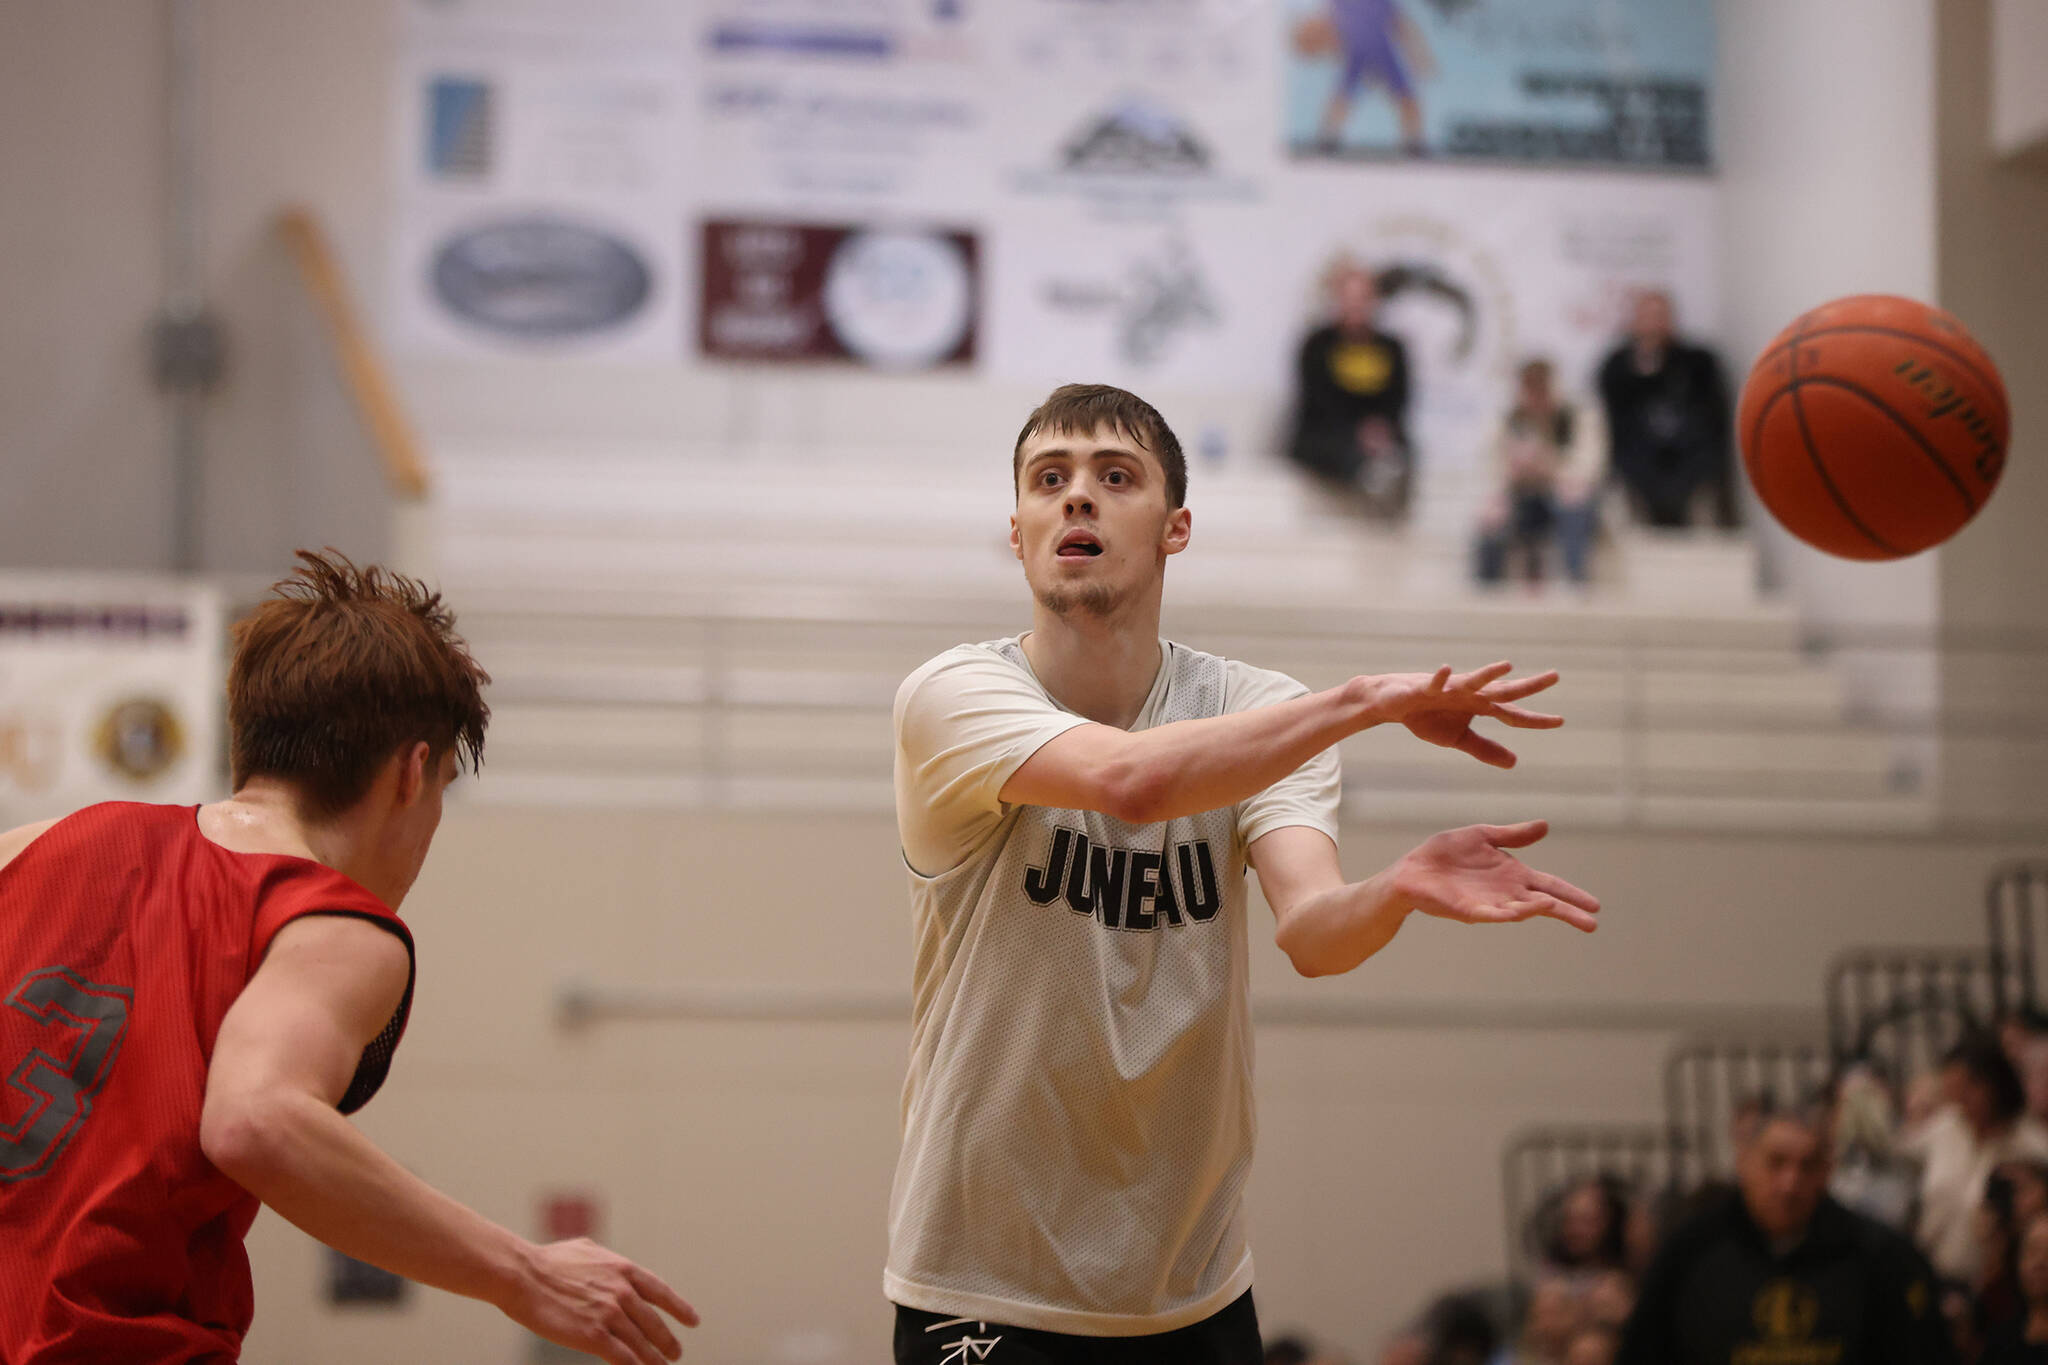 Kaleb Tompkins throws a no-look pass in the second half of a Juneau-Hydaburg B Bracket game on the fifth day of the Gold Medal Basketball Tournament.